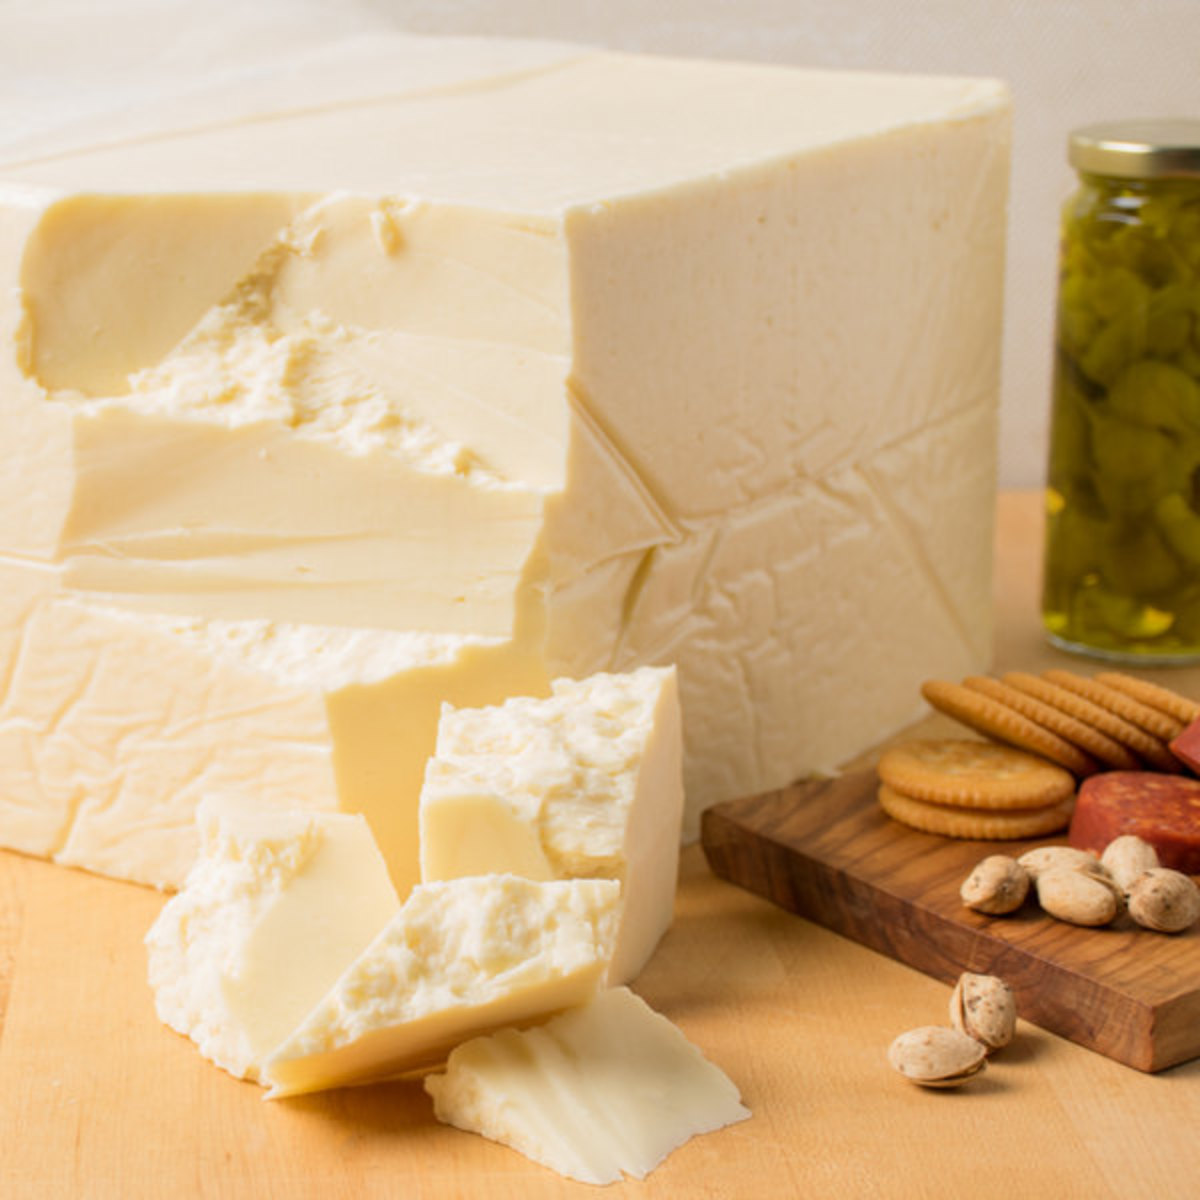 White cheddar is a popular flavoring for snacks